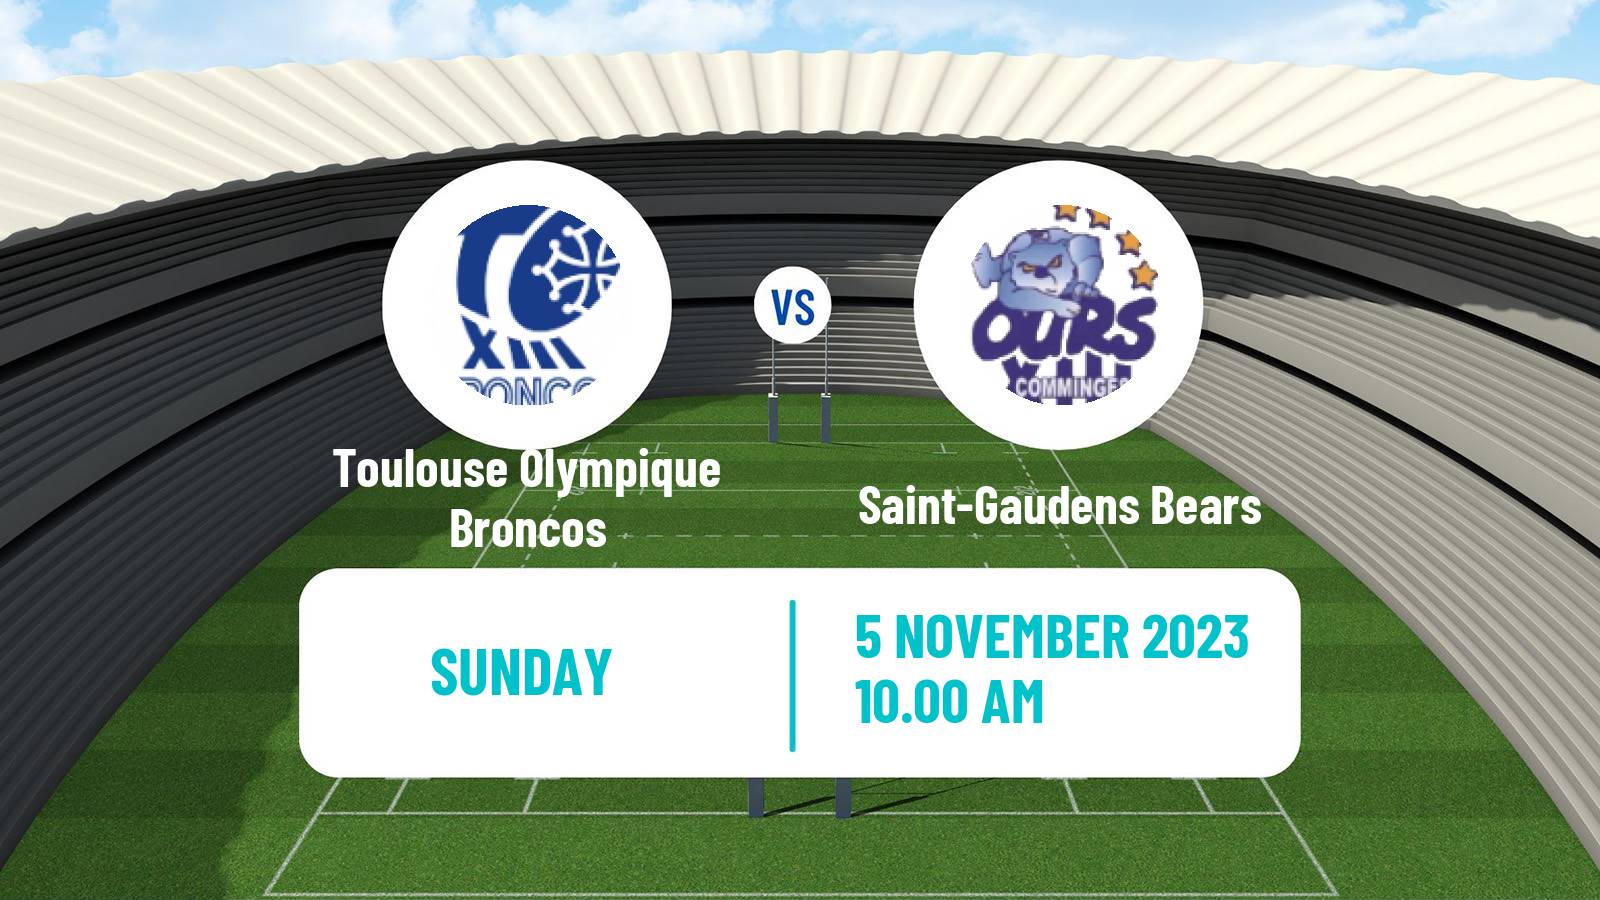 Rugby league French Elite 1 Rugby League Toulouse Olympique Broncos - Saint-Gaudens Bears